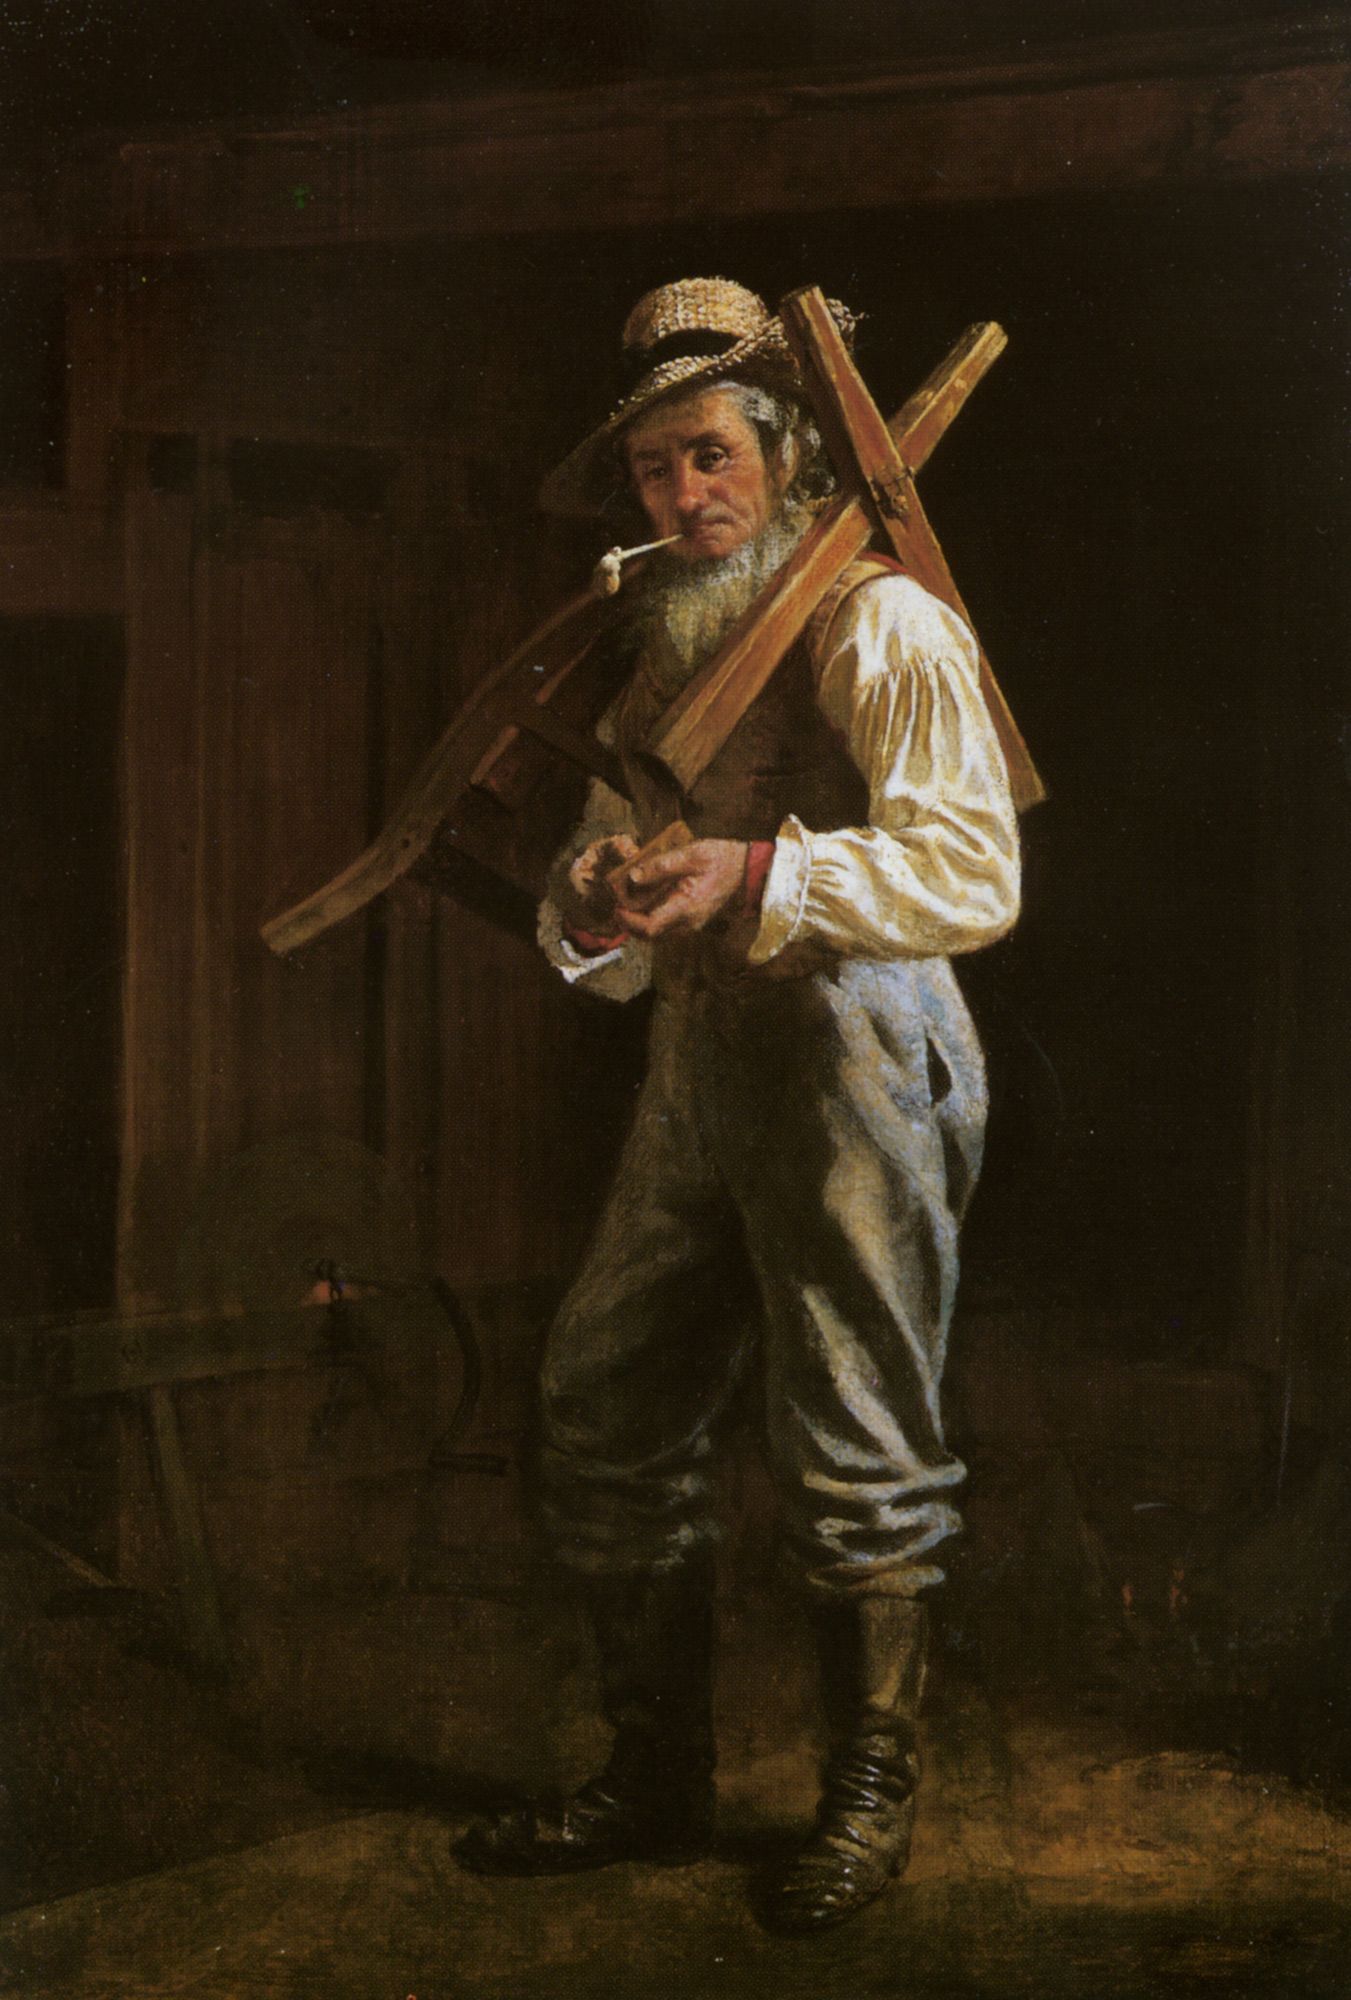 Man with Pipe by Thomas Waterman Wood